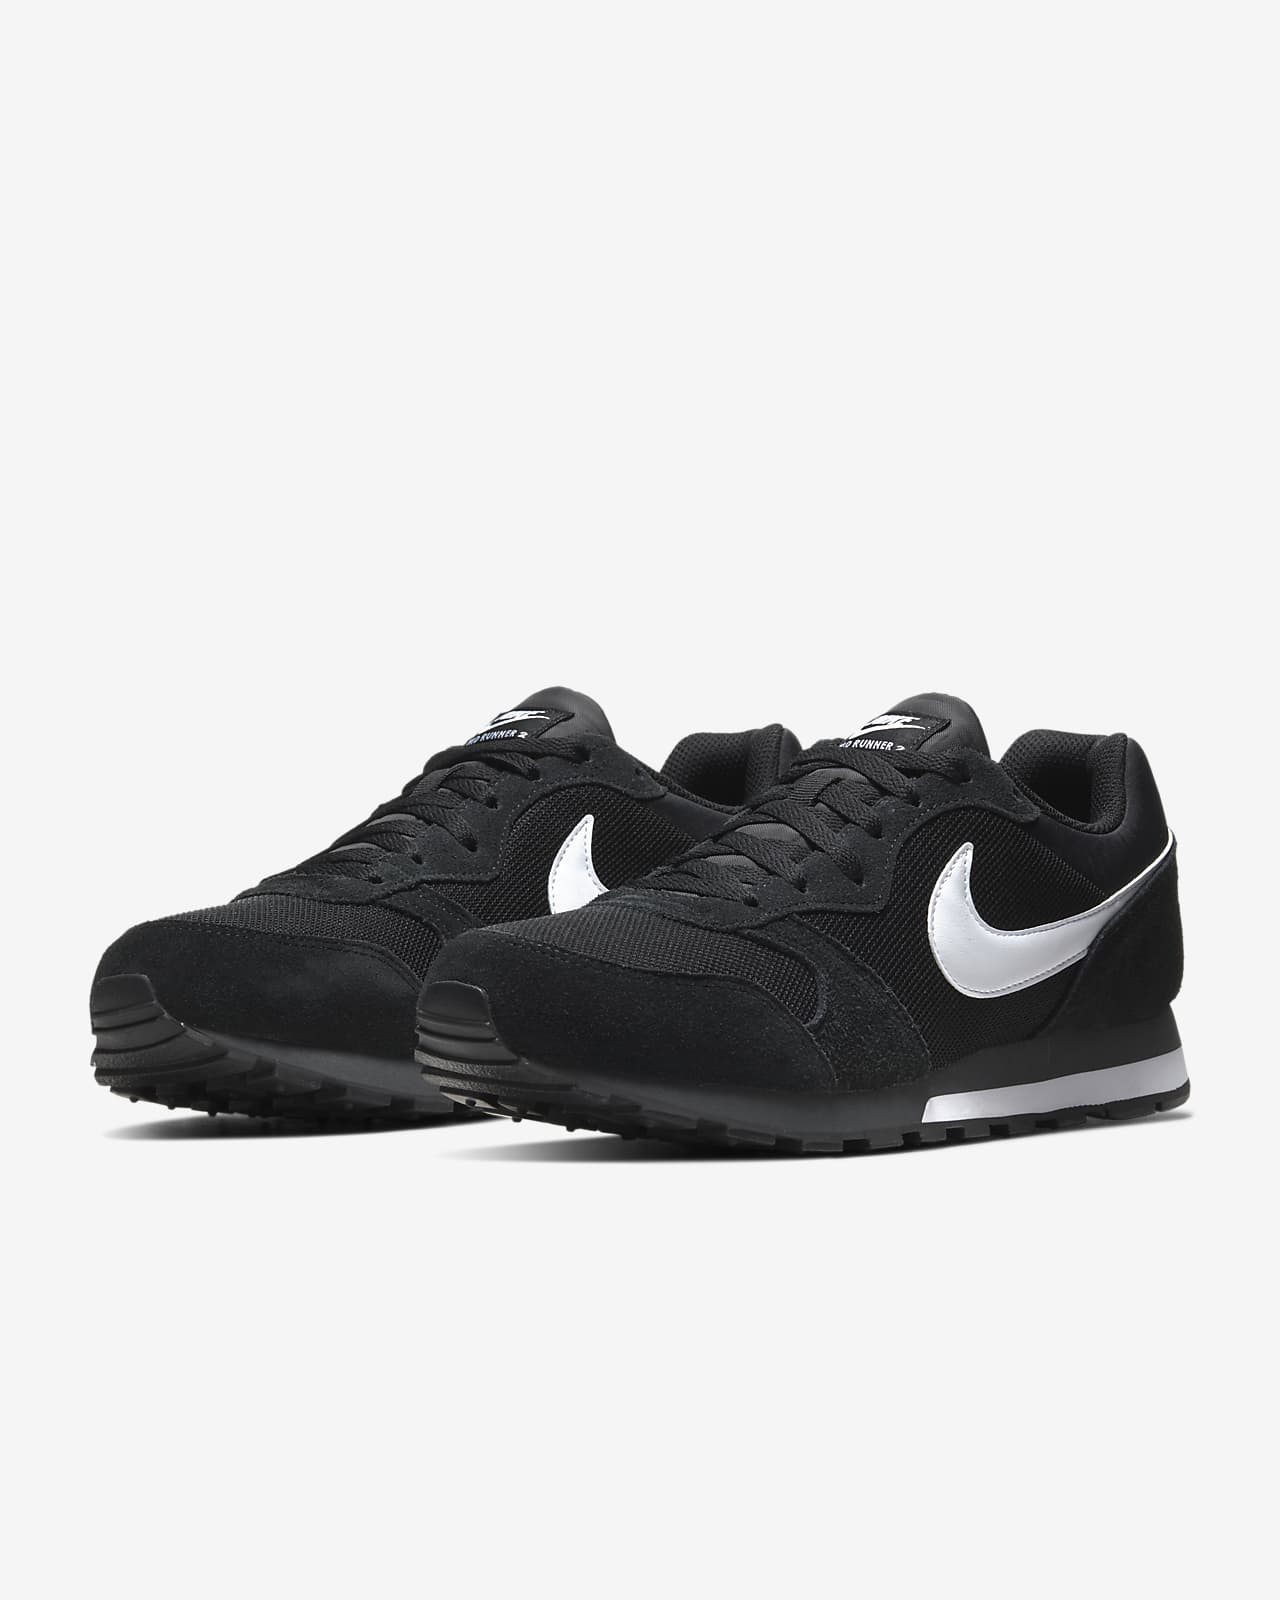 administrar Inaccesible Complacer Nike MD Runner 2 Zapatillas - Hombre. Nike ES